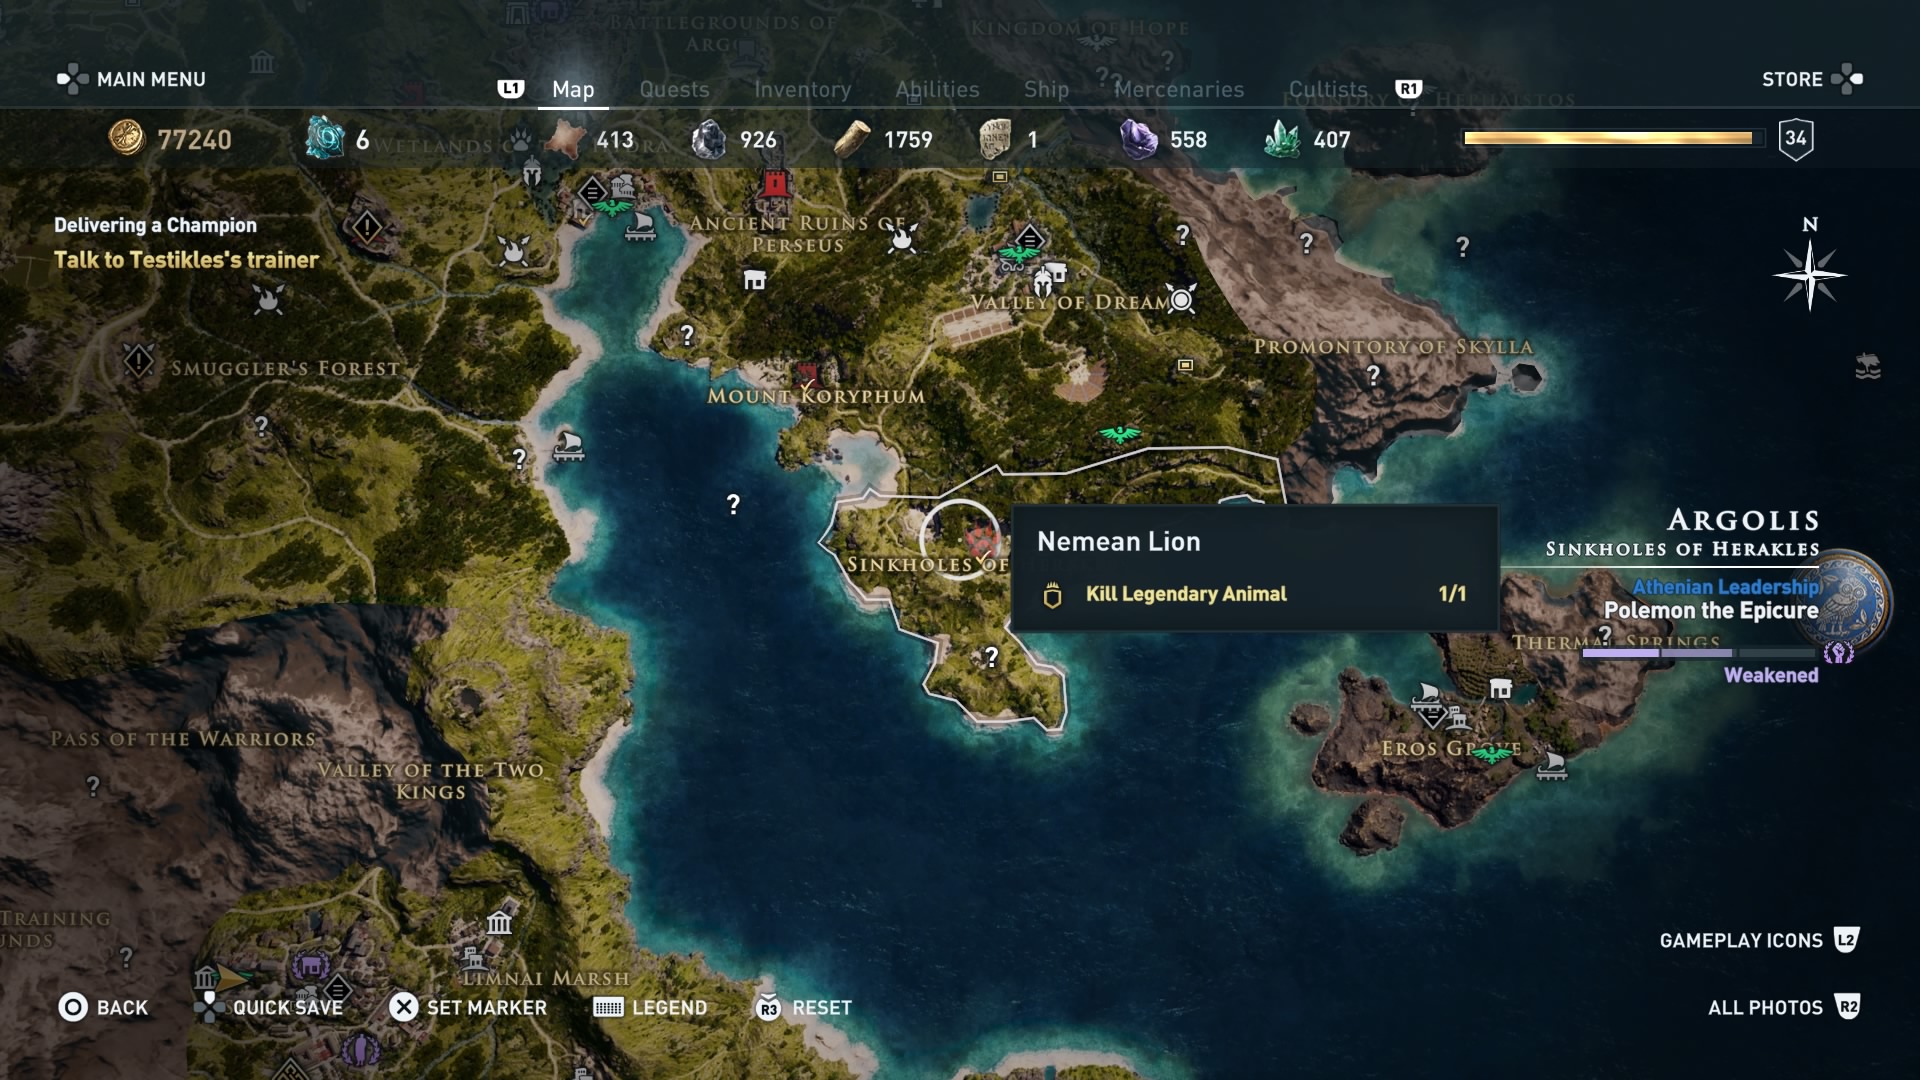 Assassin's Creed Odyssey: The Nemean Lion location